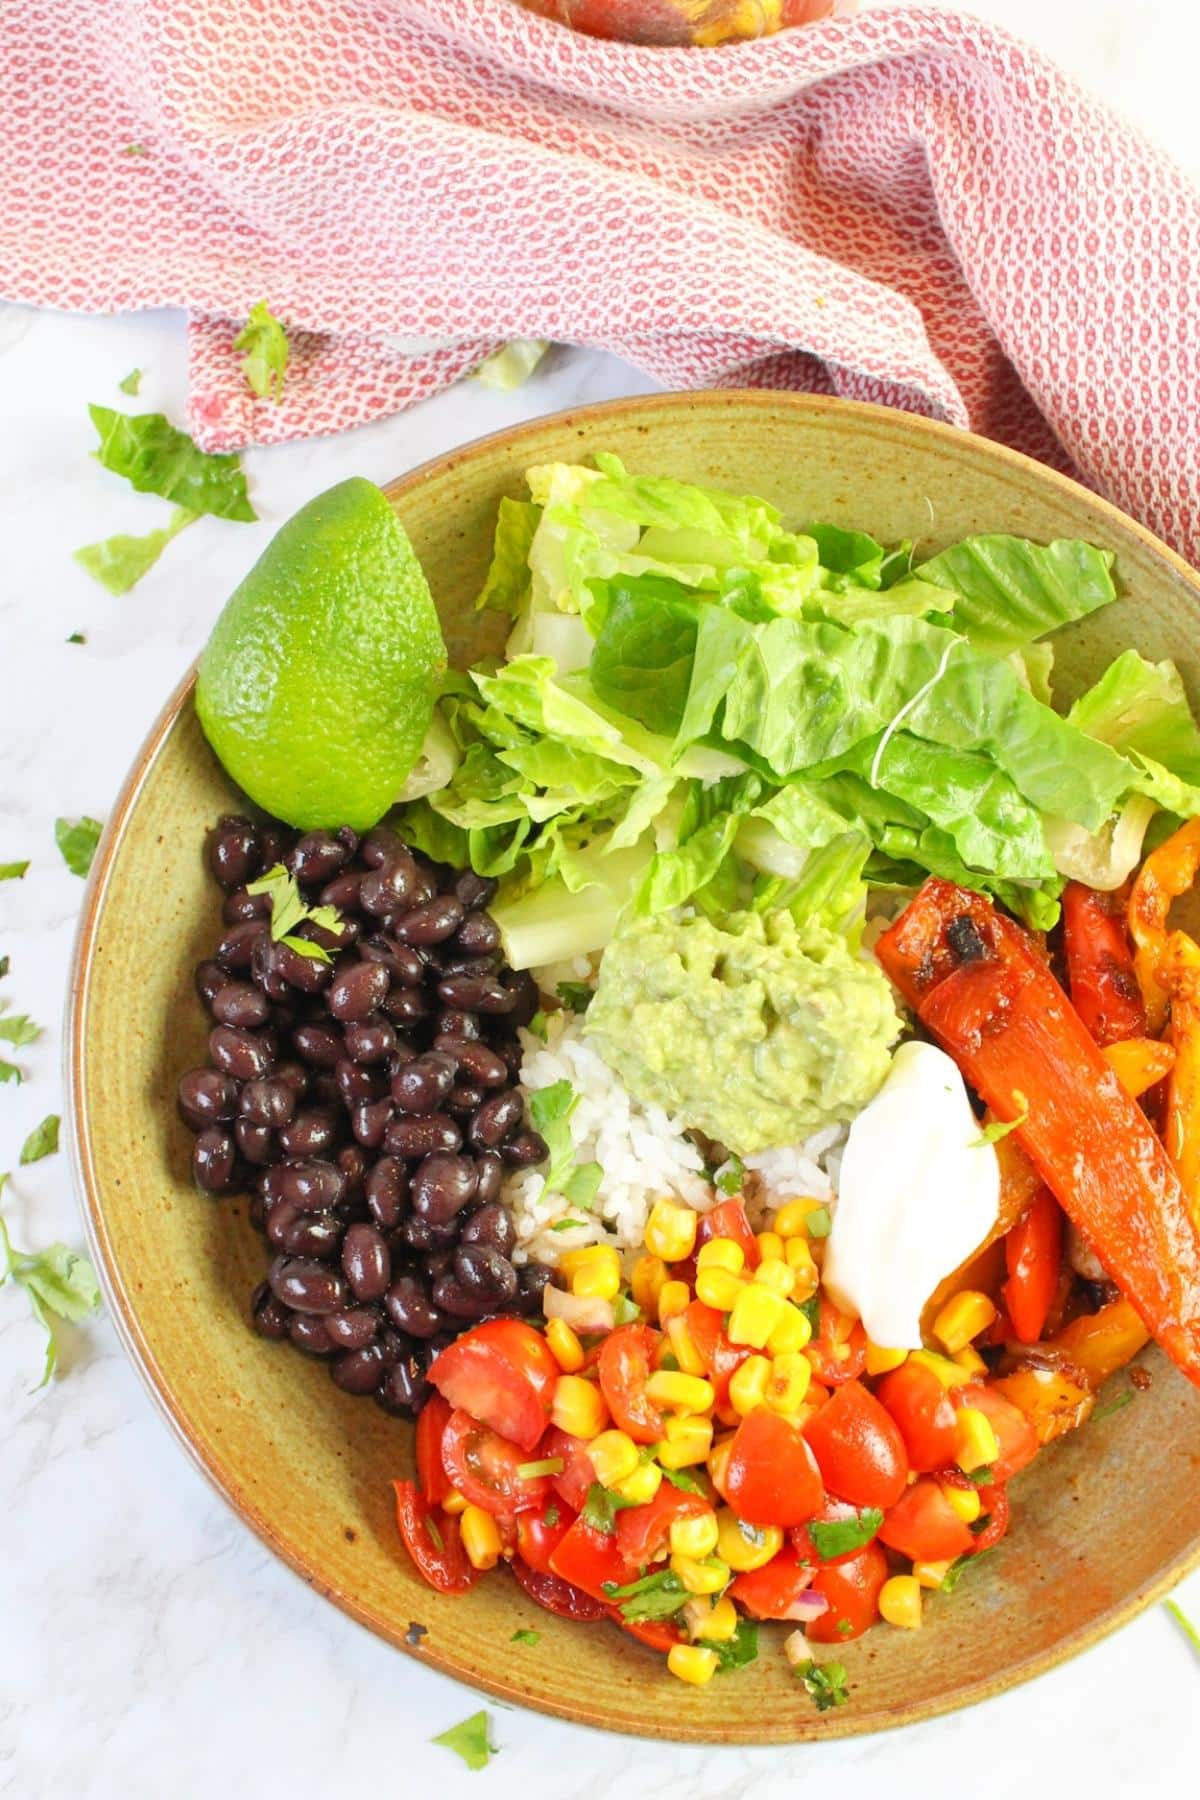 Overhead view of vegan Mexican bowl on a table